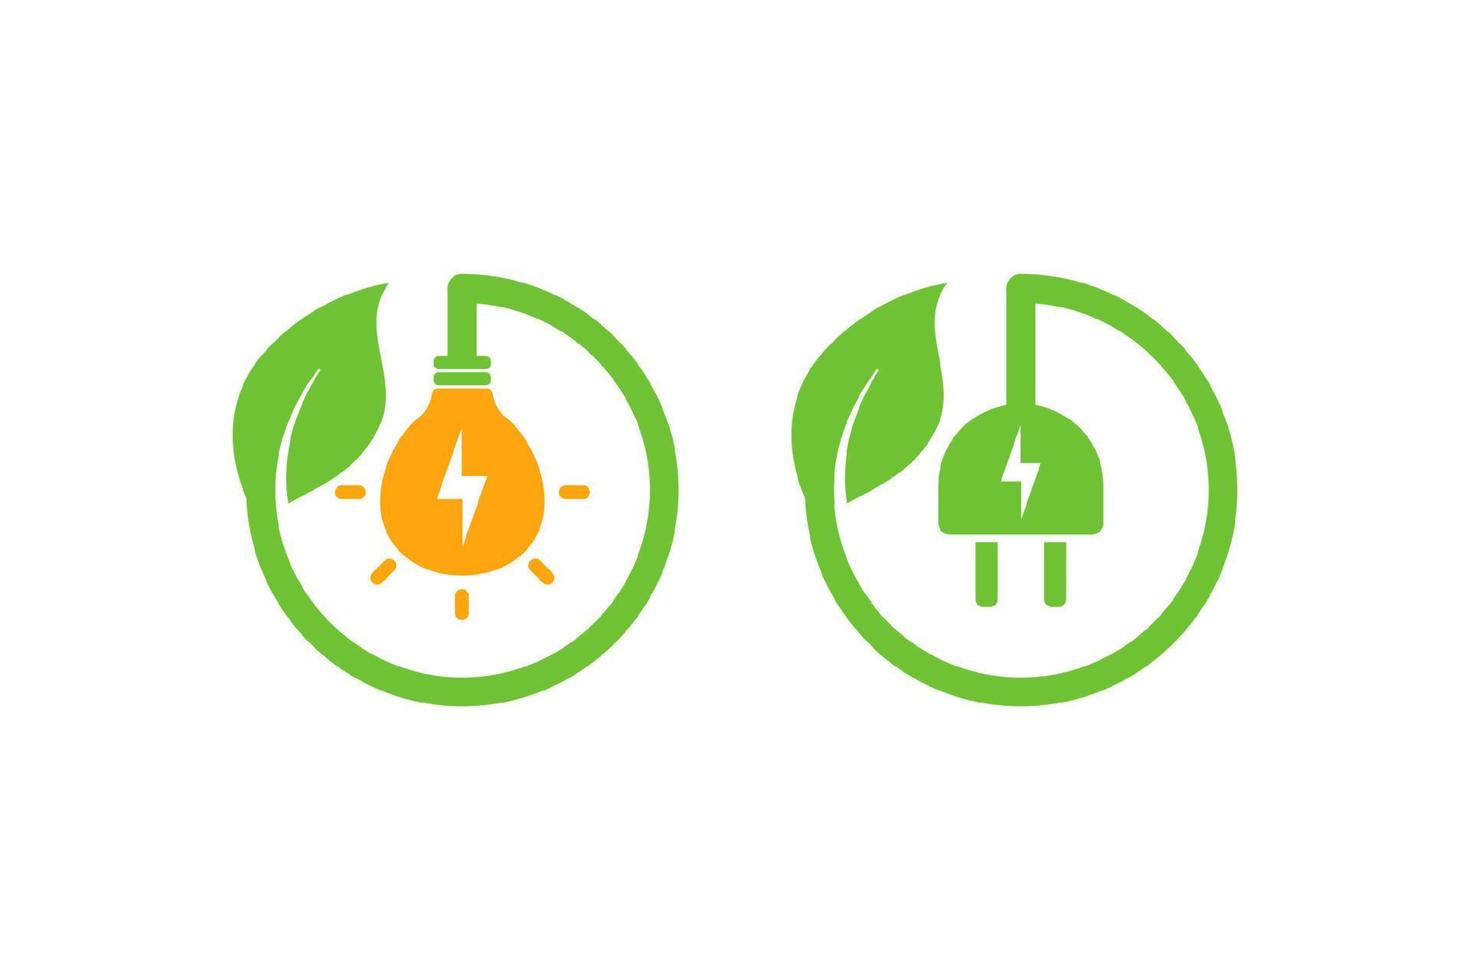 eco green electric plug icon symbol vector design with leaf. Eco green energy icons signs with bulb shape.